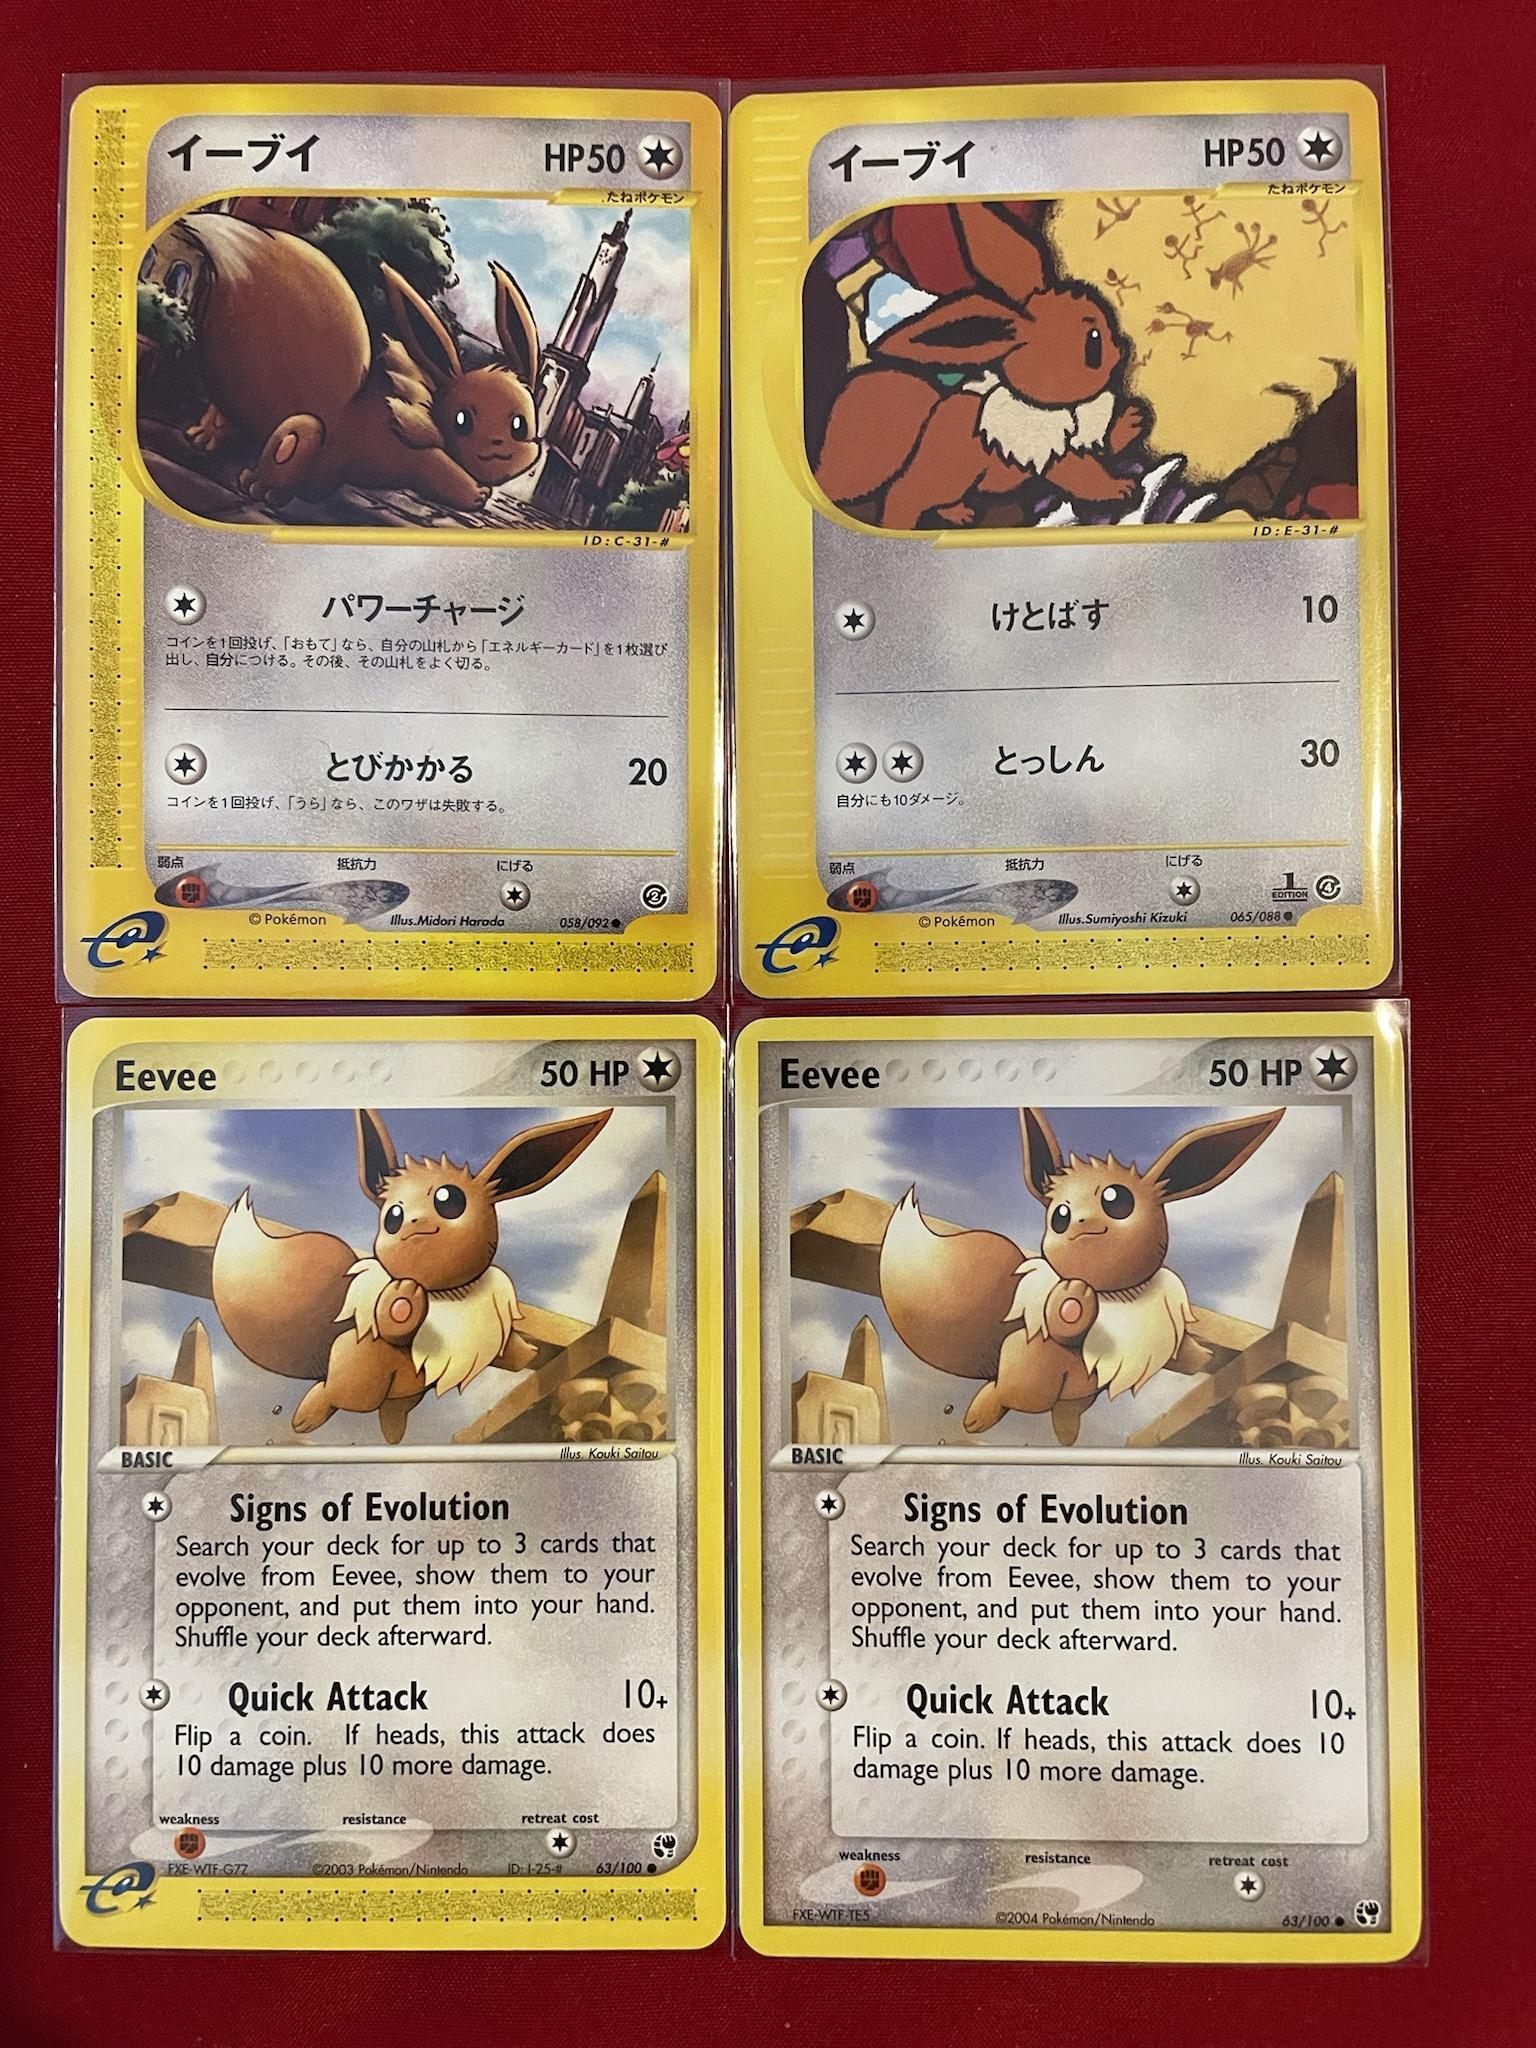 I'm looking to get my bro a gift. He loves Leafeon and is currently  collecting. Which do you think is best? : r/pokemoncards